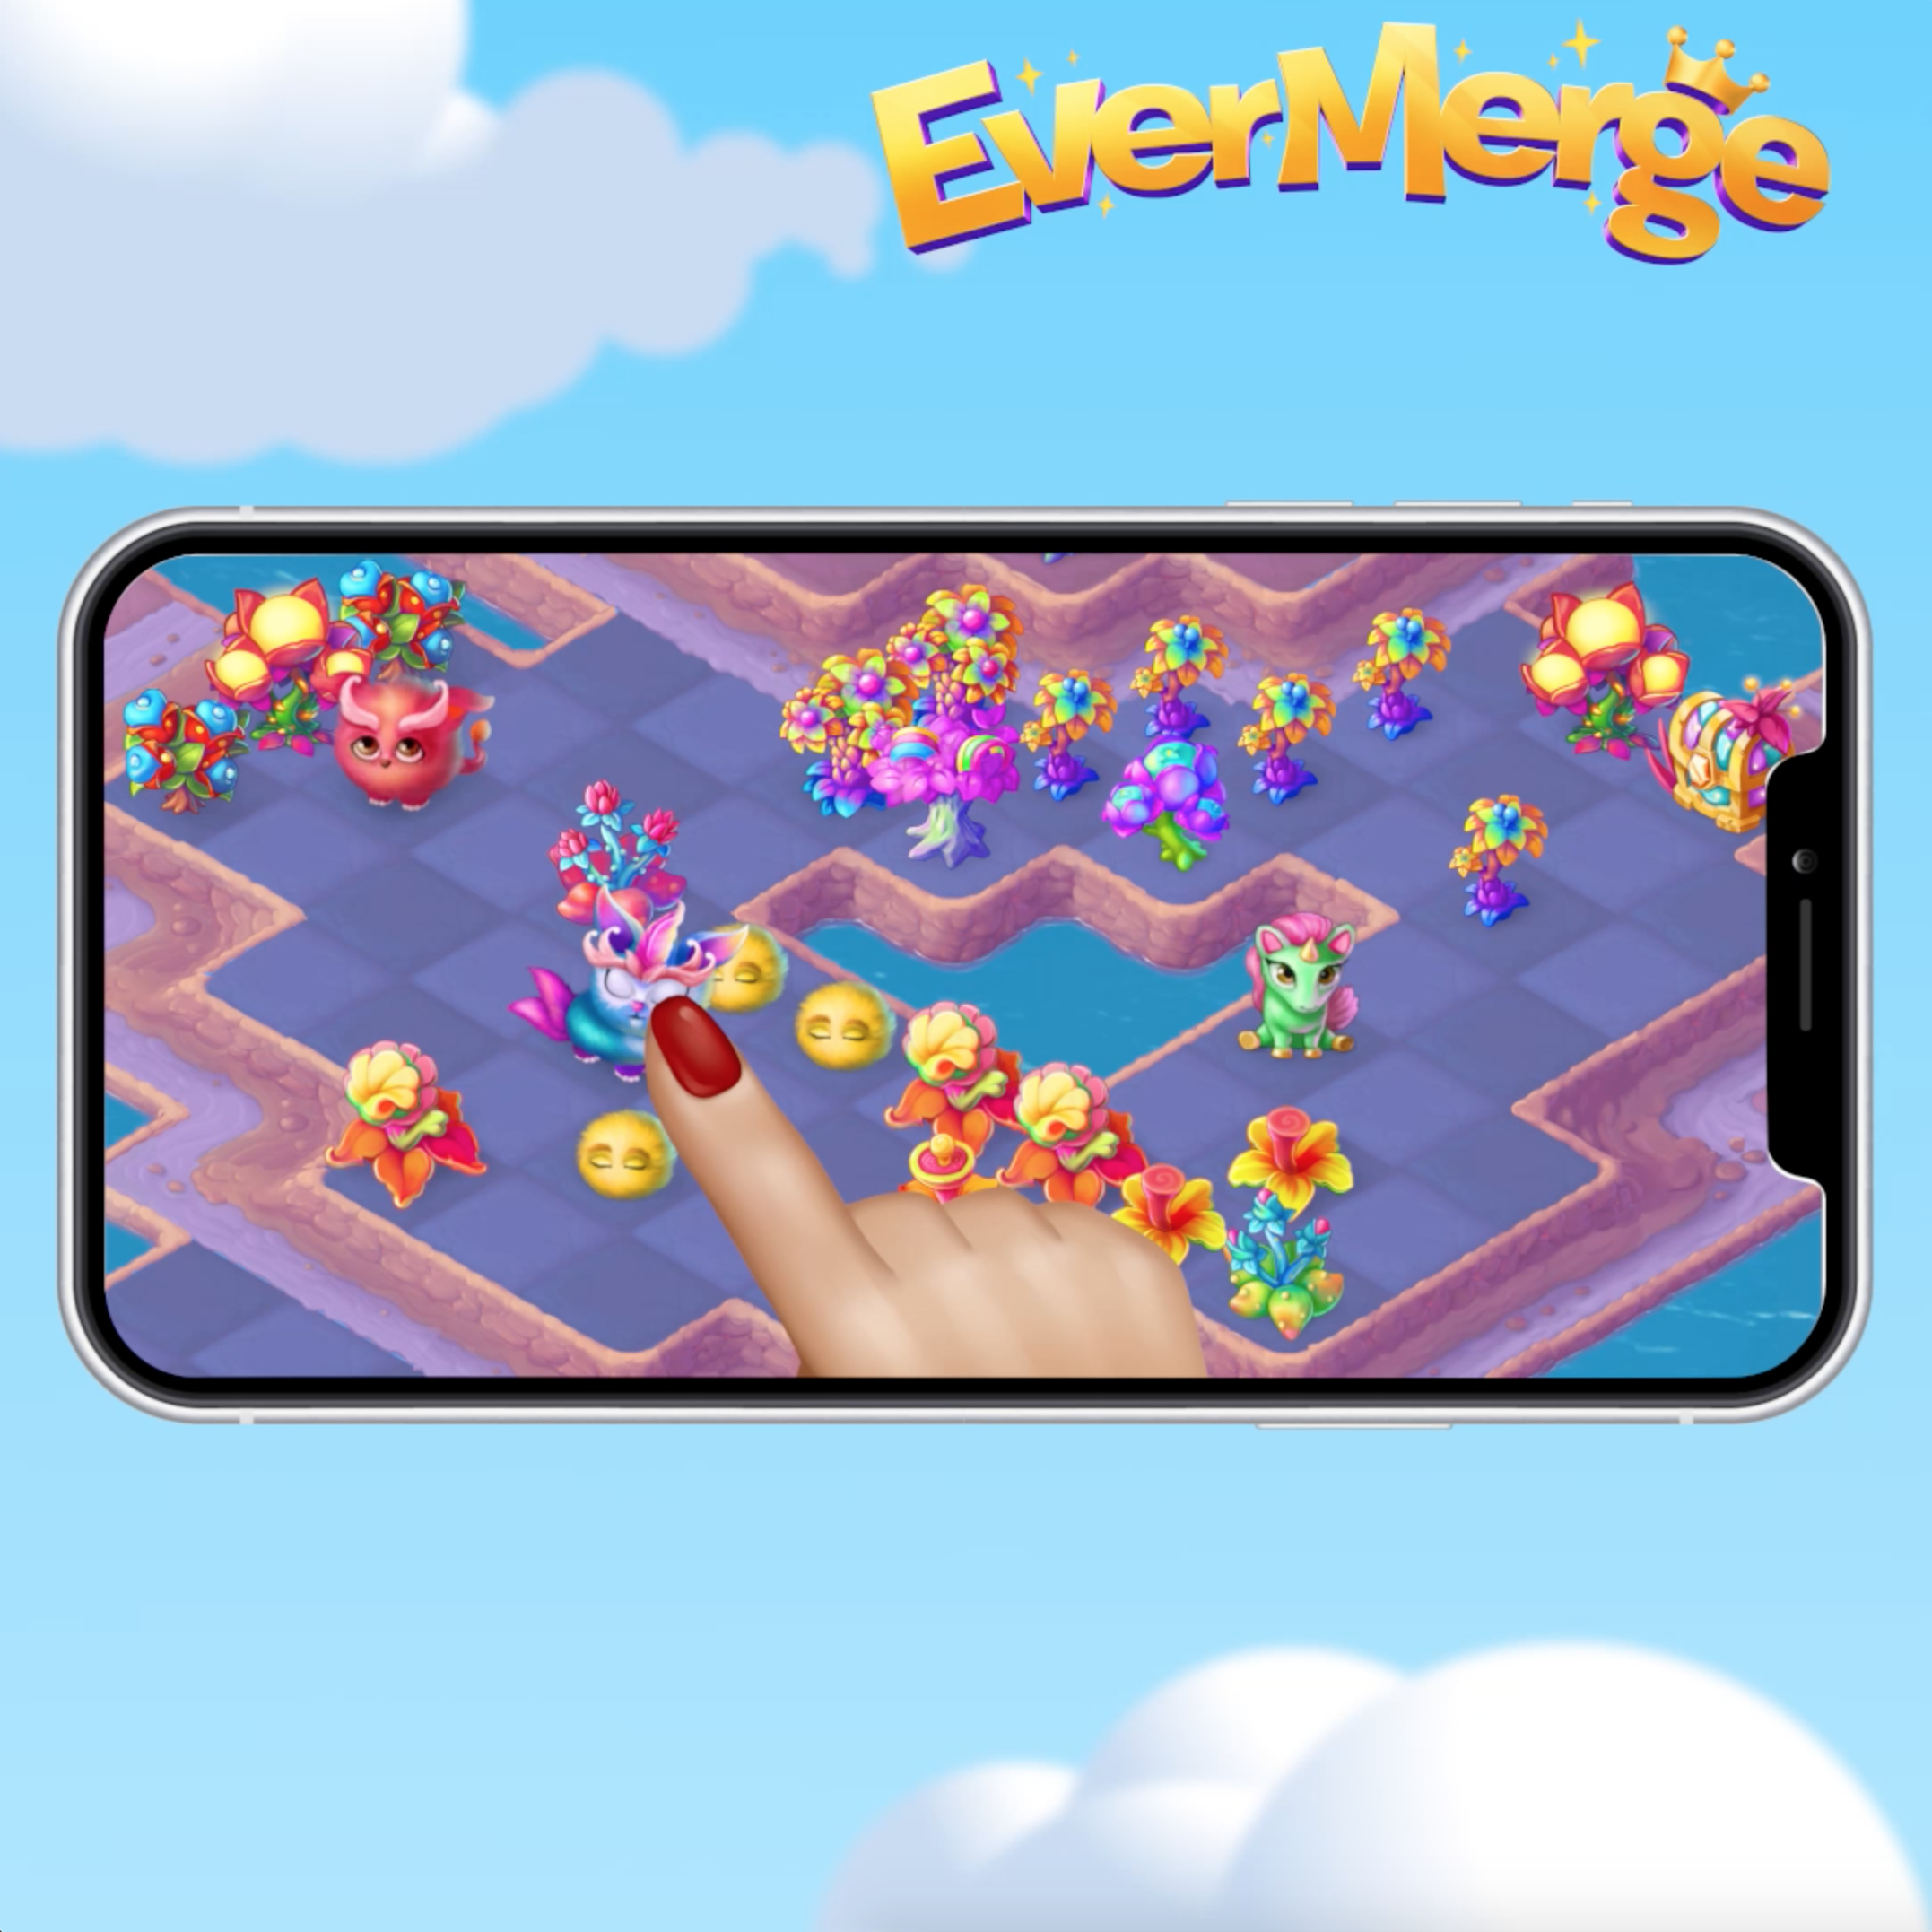 Evermerge Game on Device